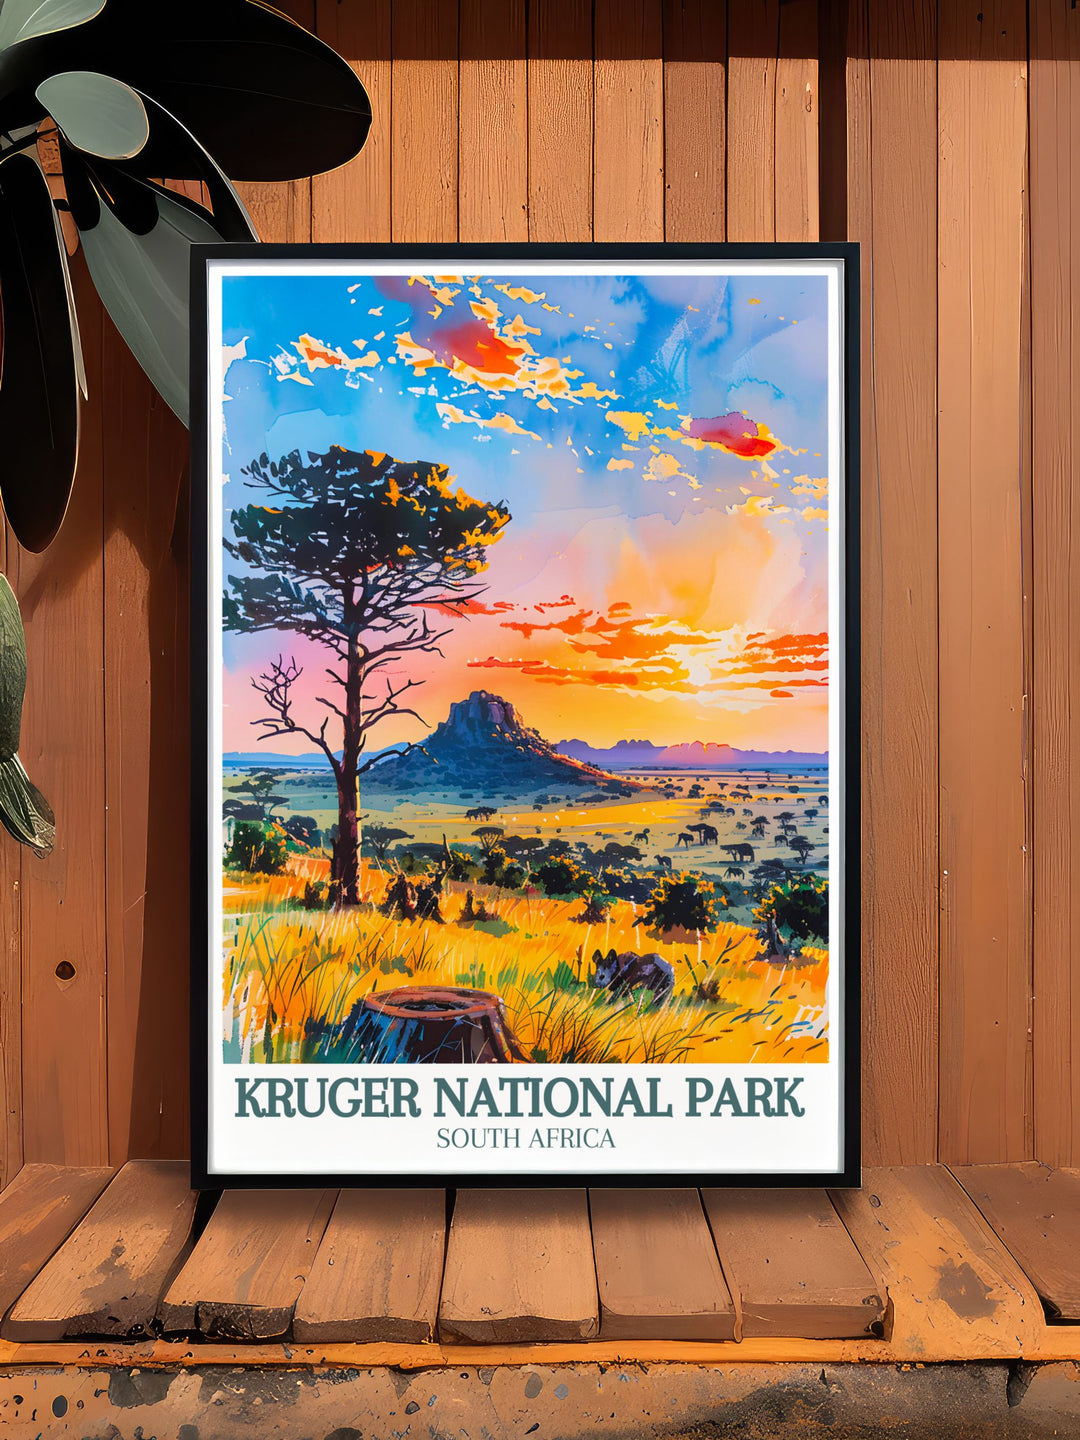 The majestic Kruger National Park, spanning nearly 20,000 square kilometers, is highlighted in this travel poster. Ideal for those who appreciate wildlife and natural beauty, this artwork brings the spirit of African safaris into your home.